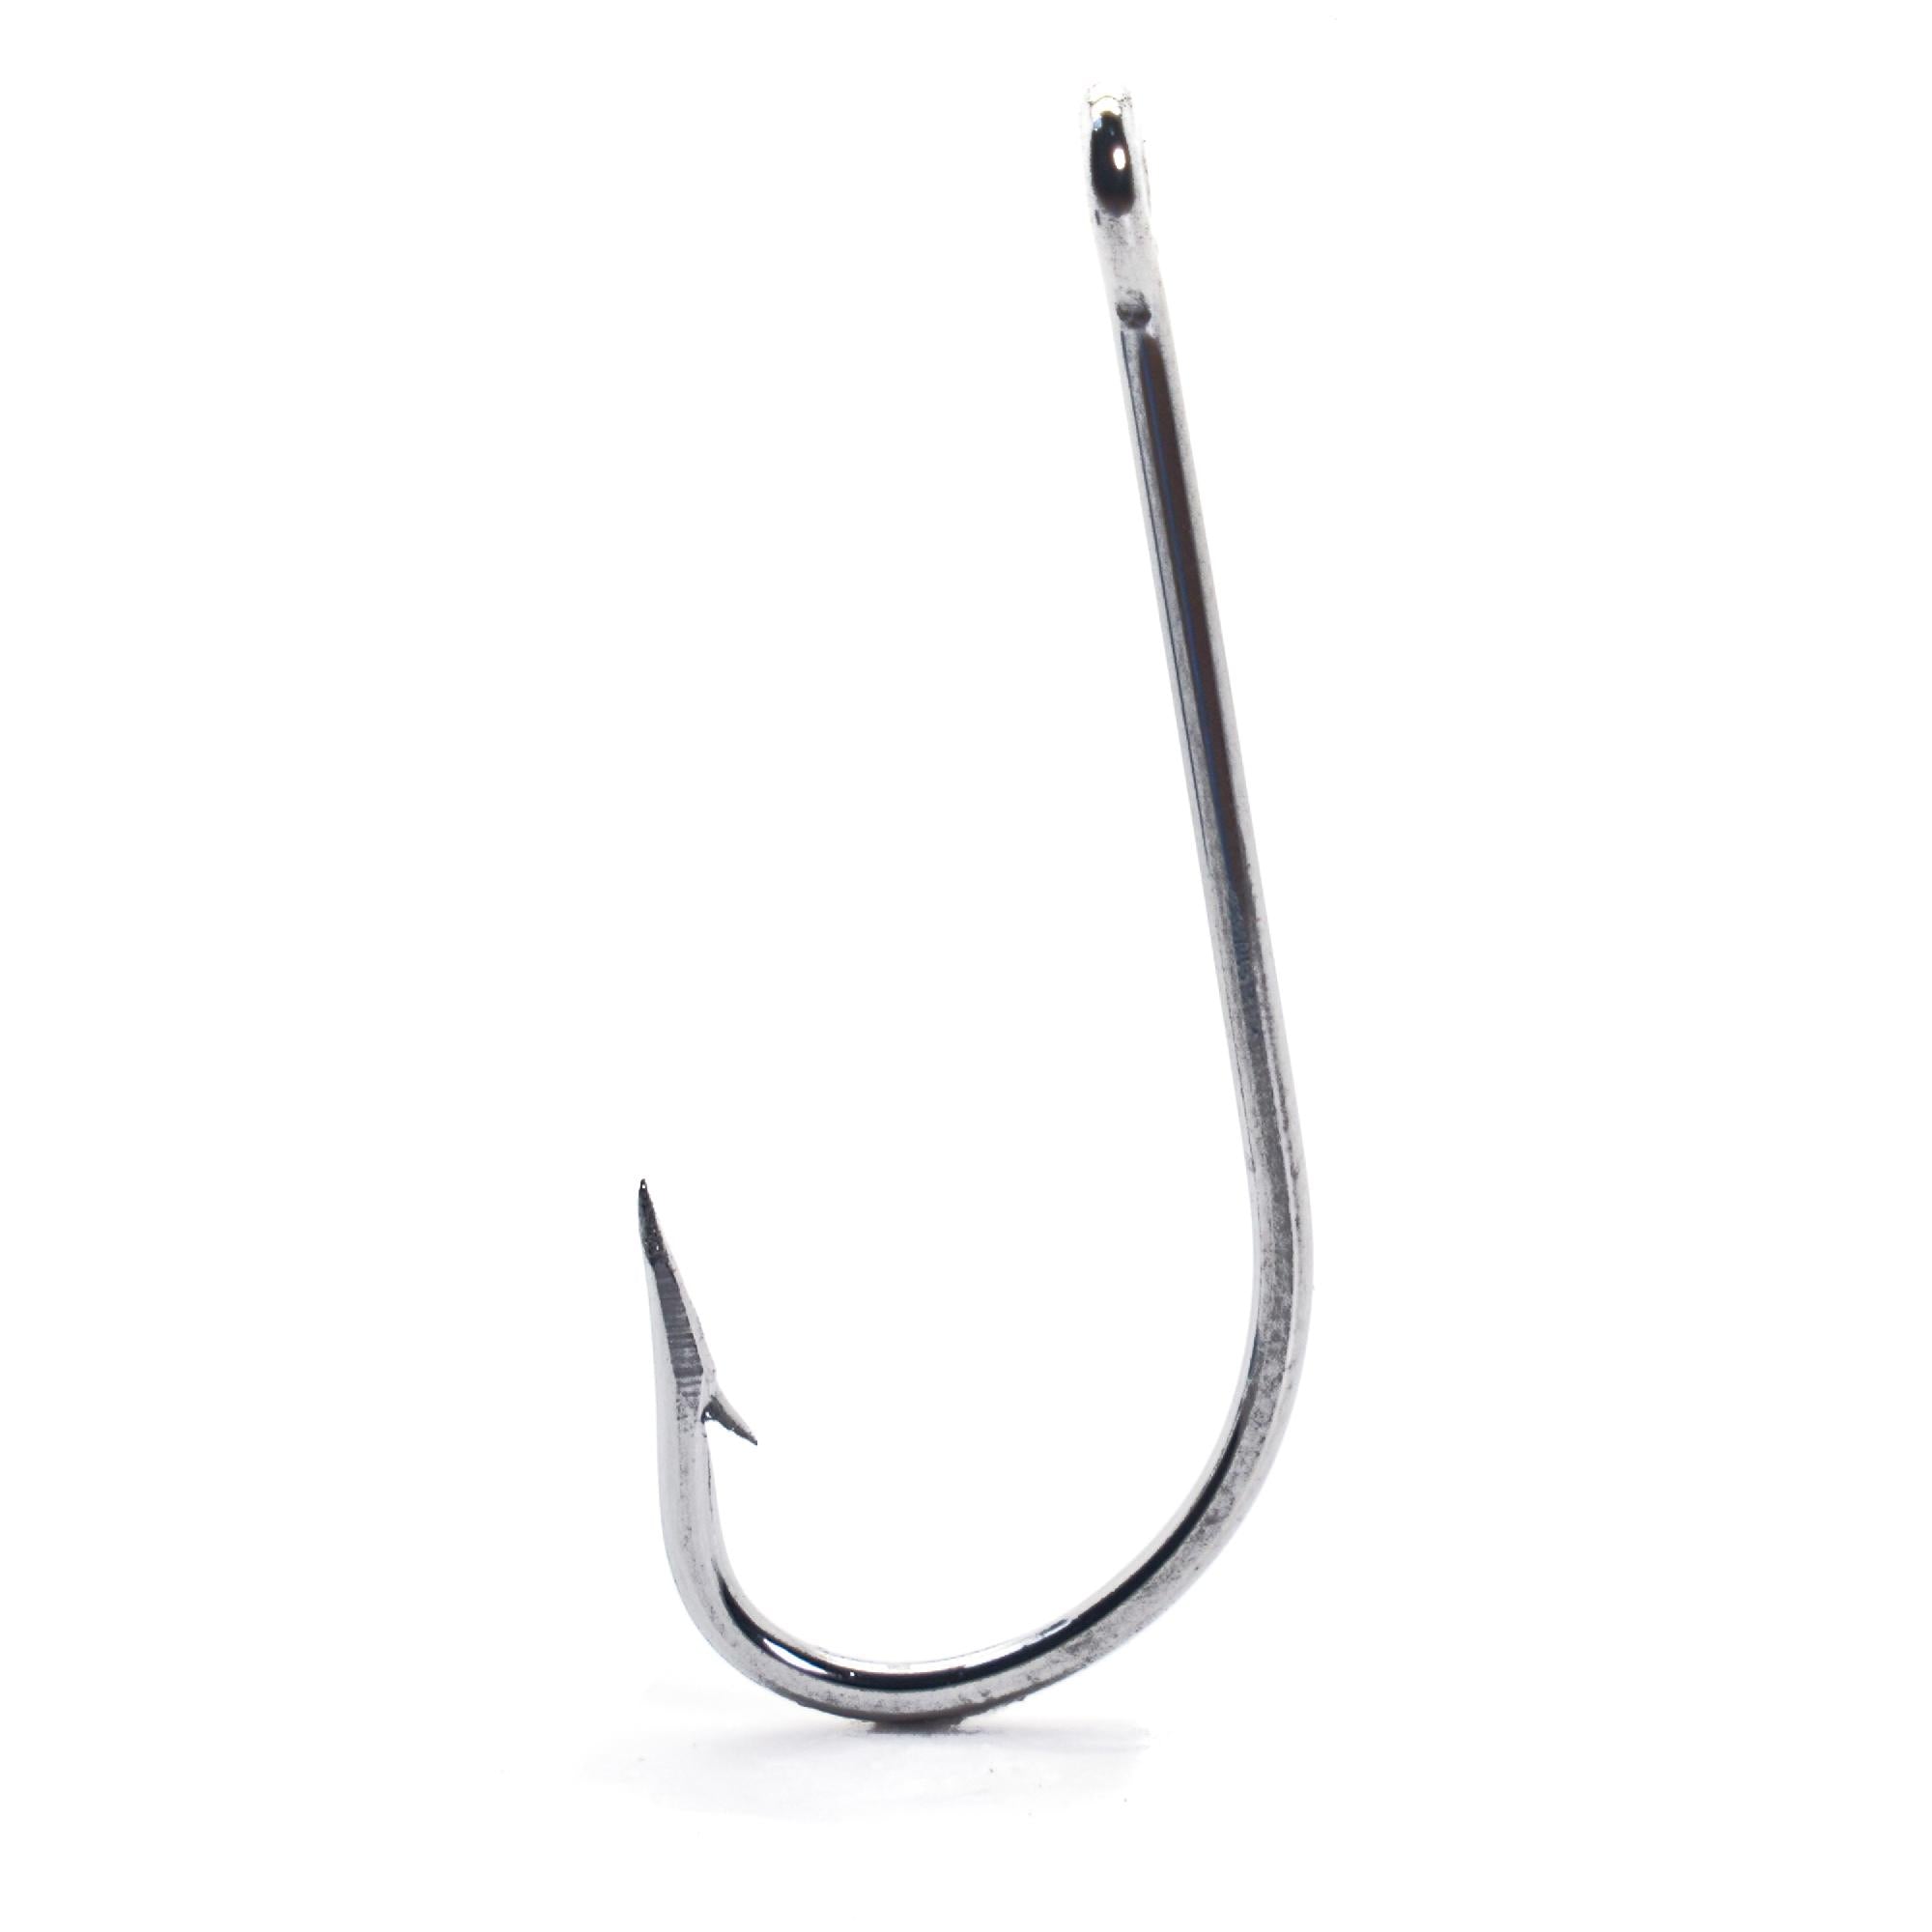 100 x Stainless Steel Saltwater Fishing Hook 9225 O'shaughnessy